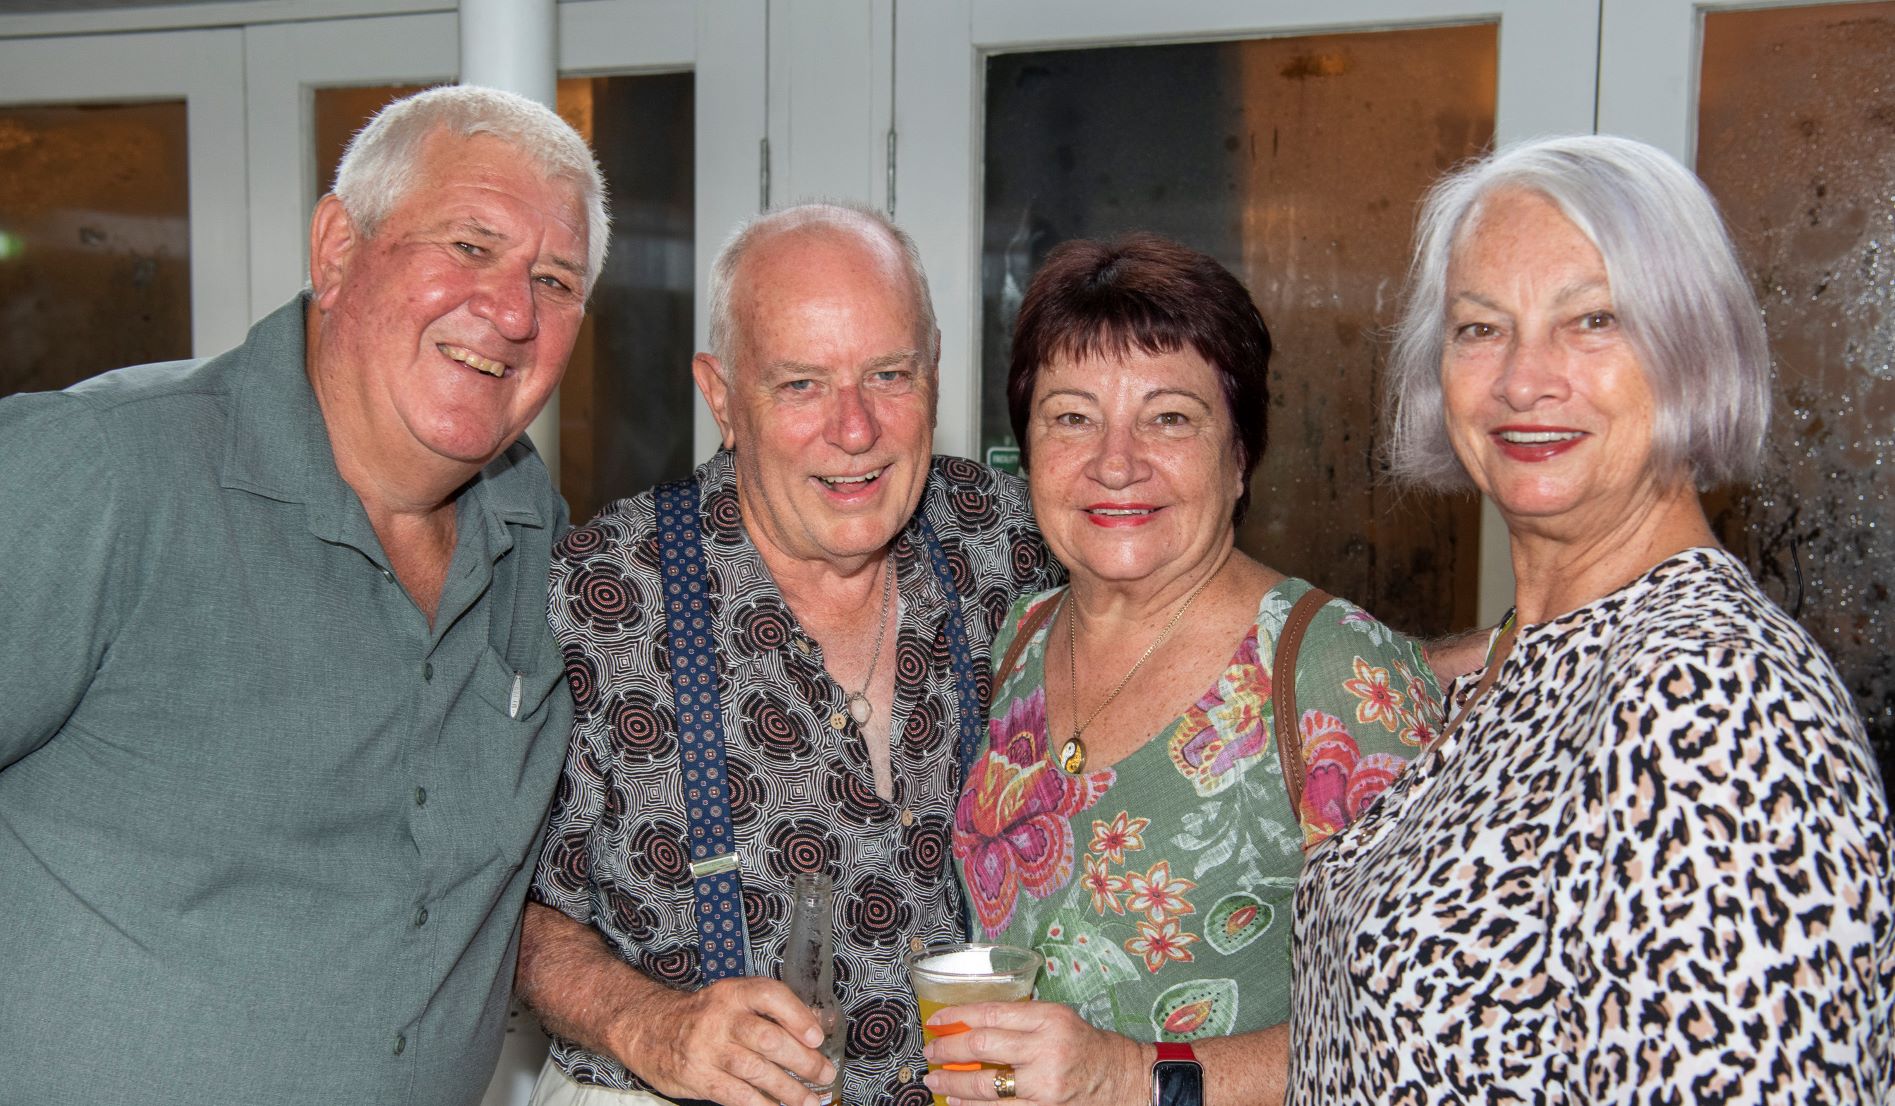 IN PHOTOS: Outback drover entertains at dinner